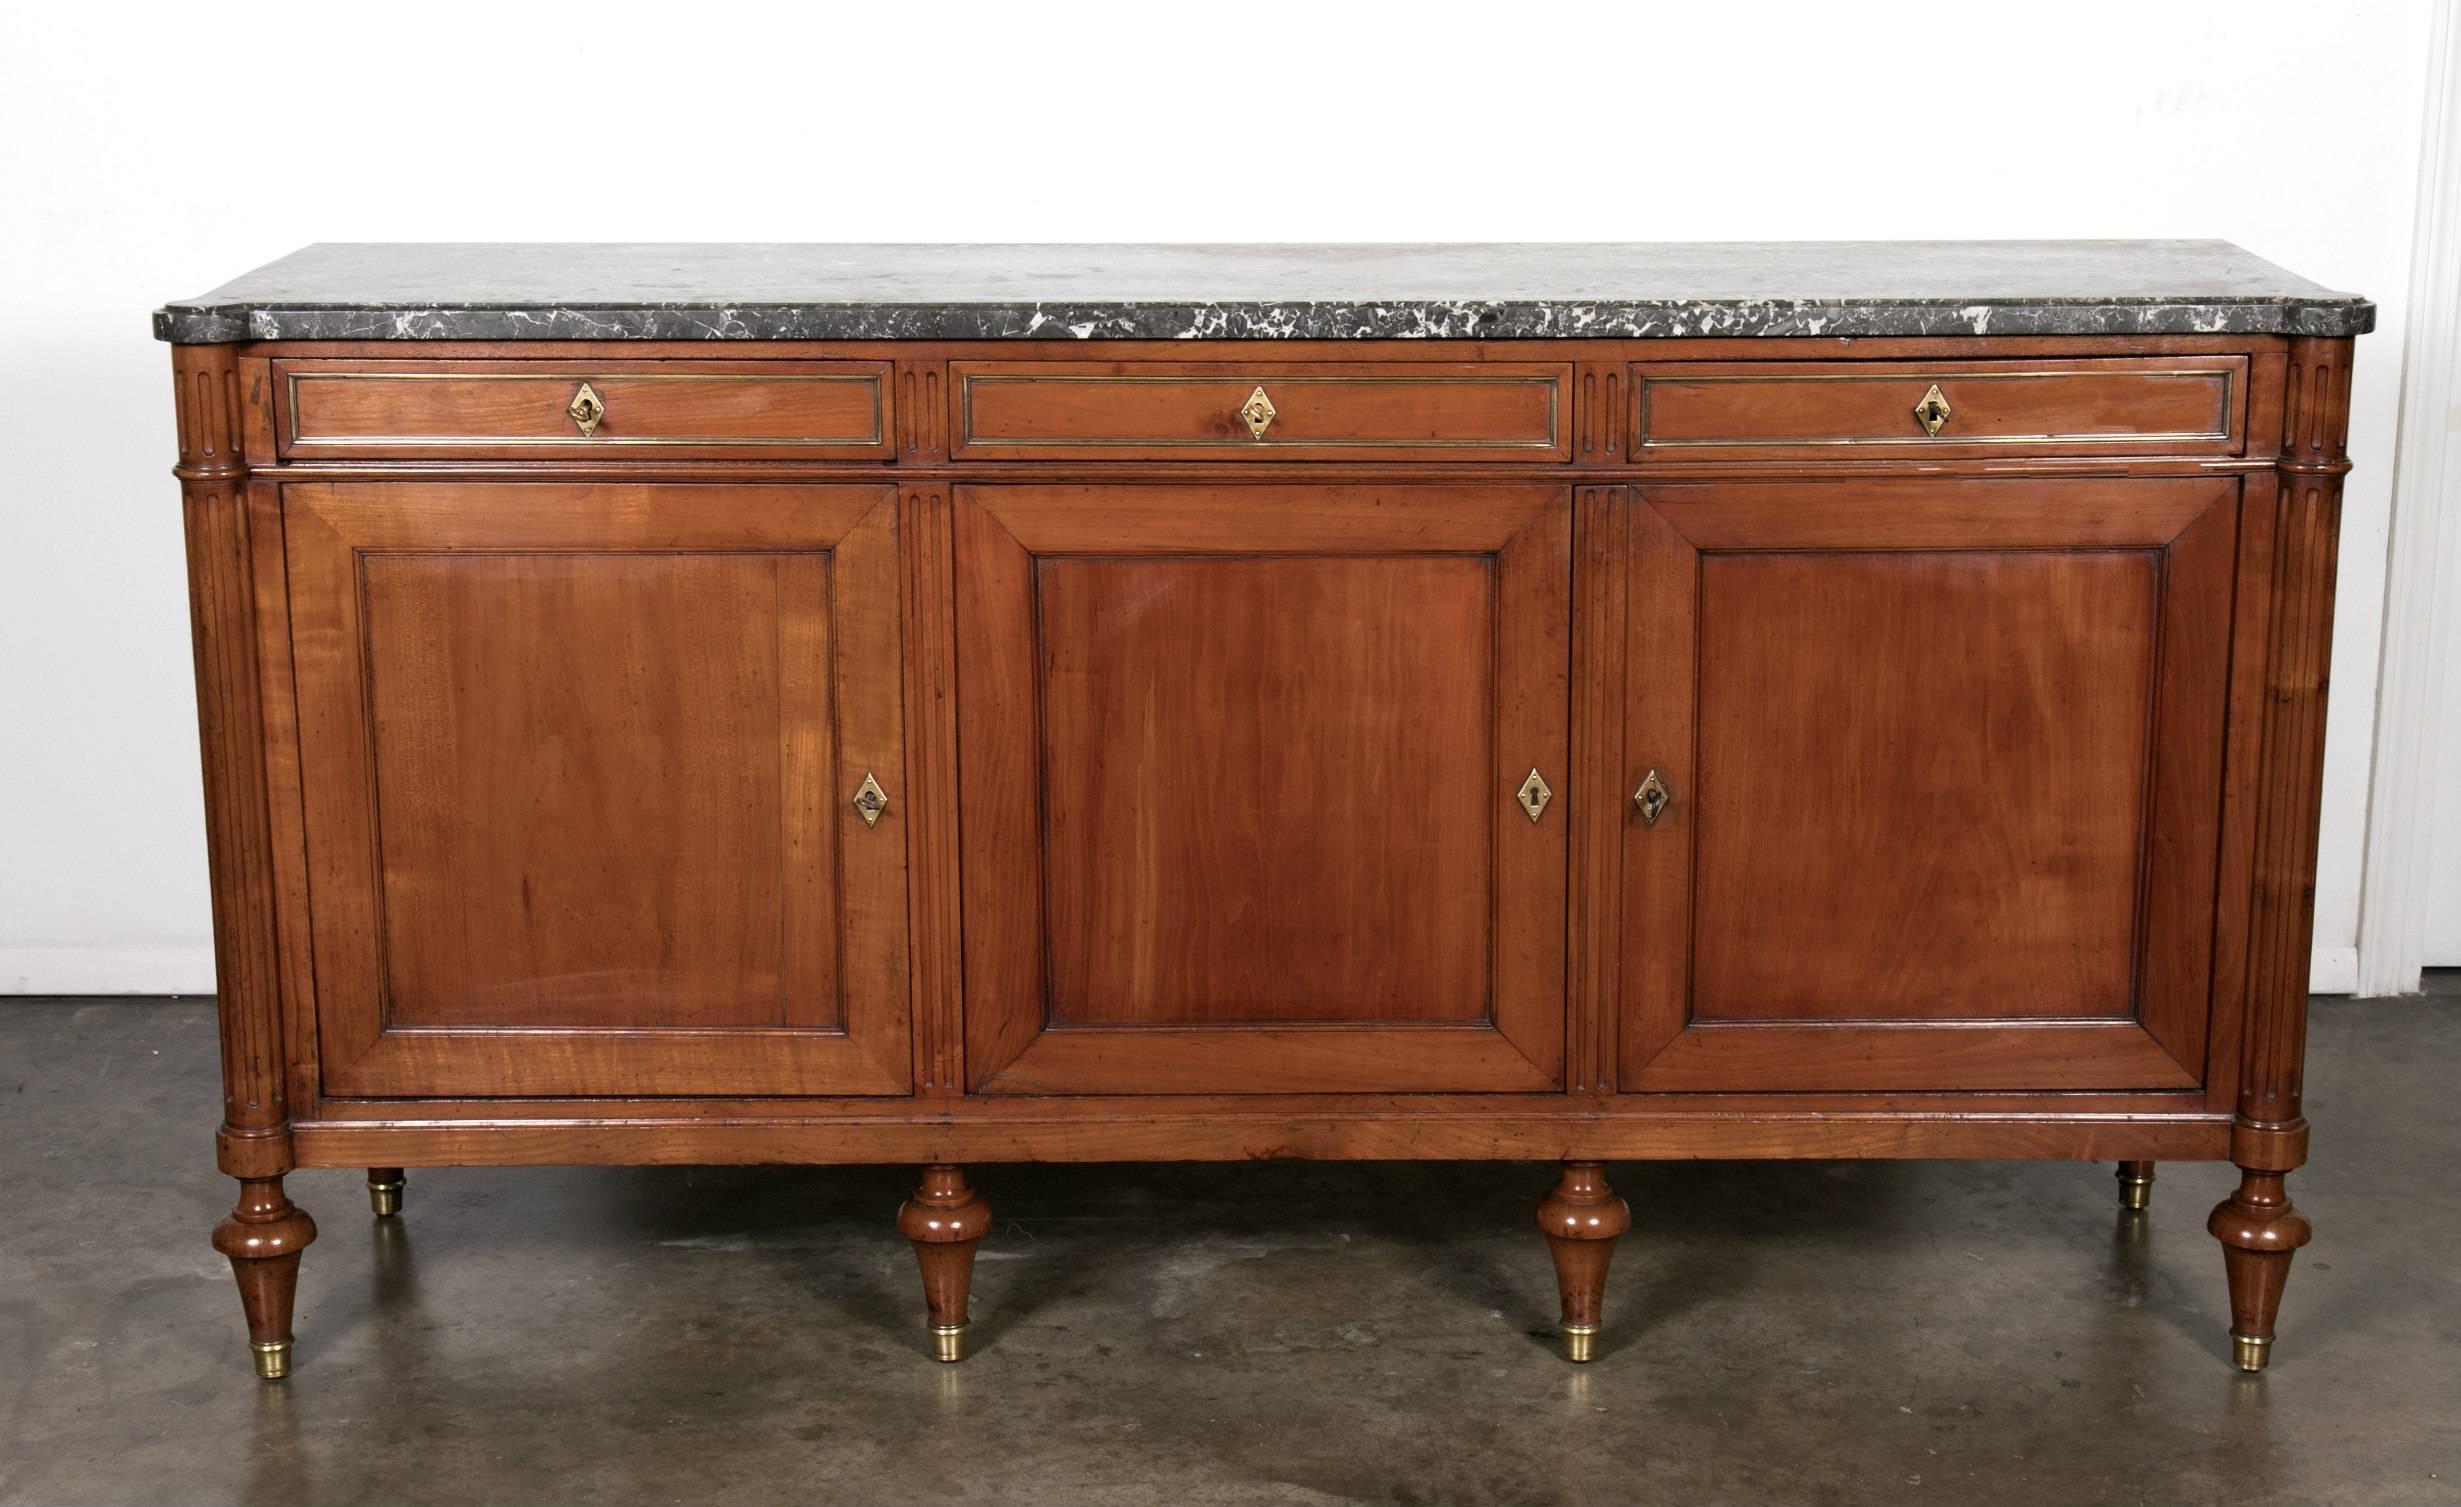 A 19th century Louis XVI style walnut enfilade with Saint Anne marble-top in excellent original condition, retaining its beautiful rich, original color and patina with a fresh French polish that allows the wood to shine. Three drawers over three